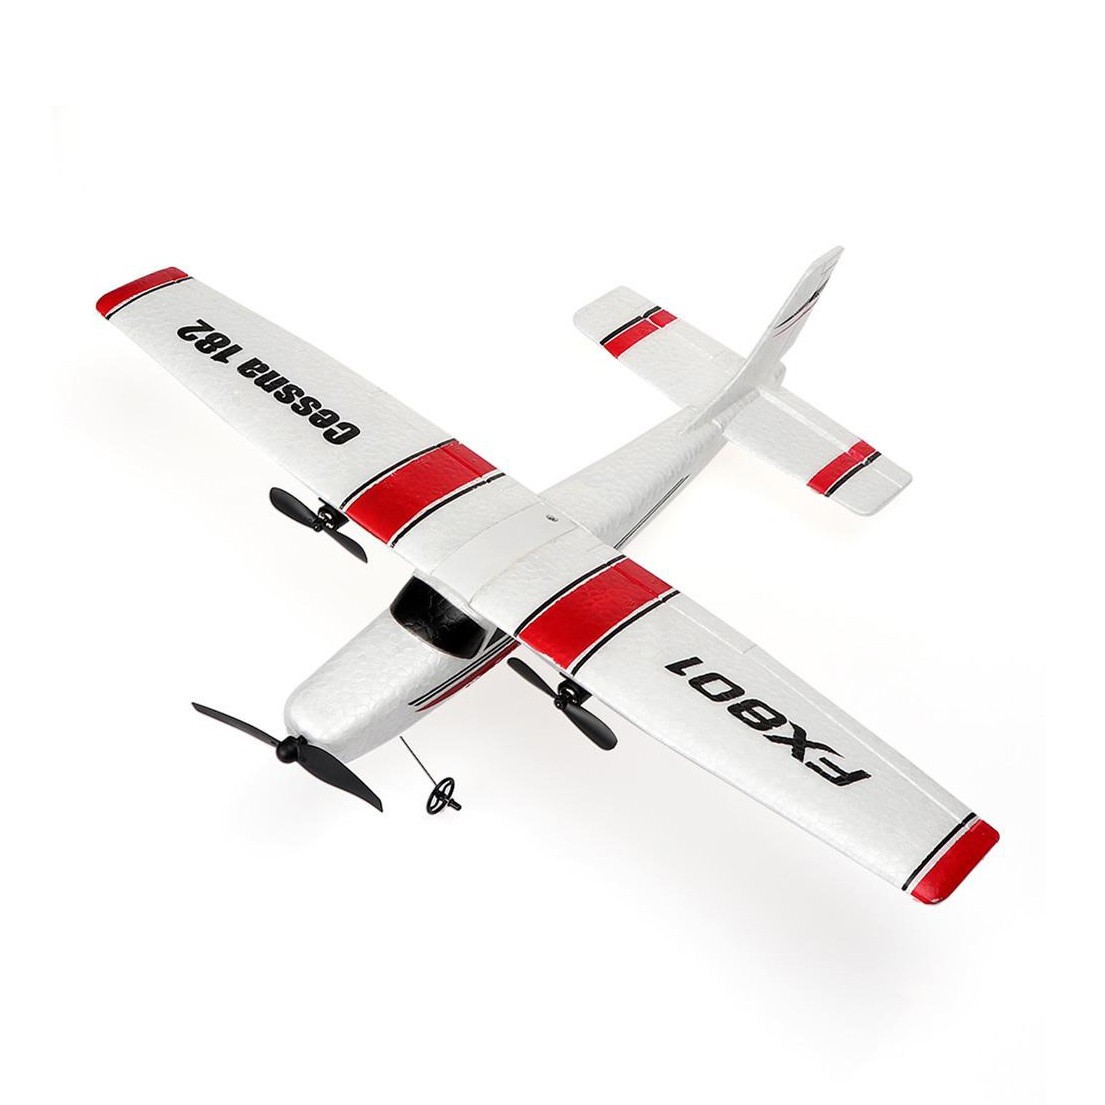 FX801 rc planes electric airplane assembly foam glider toy battery rc jet avionetas a control remoto